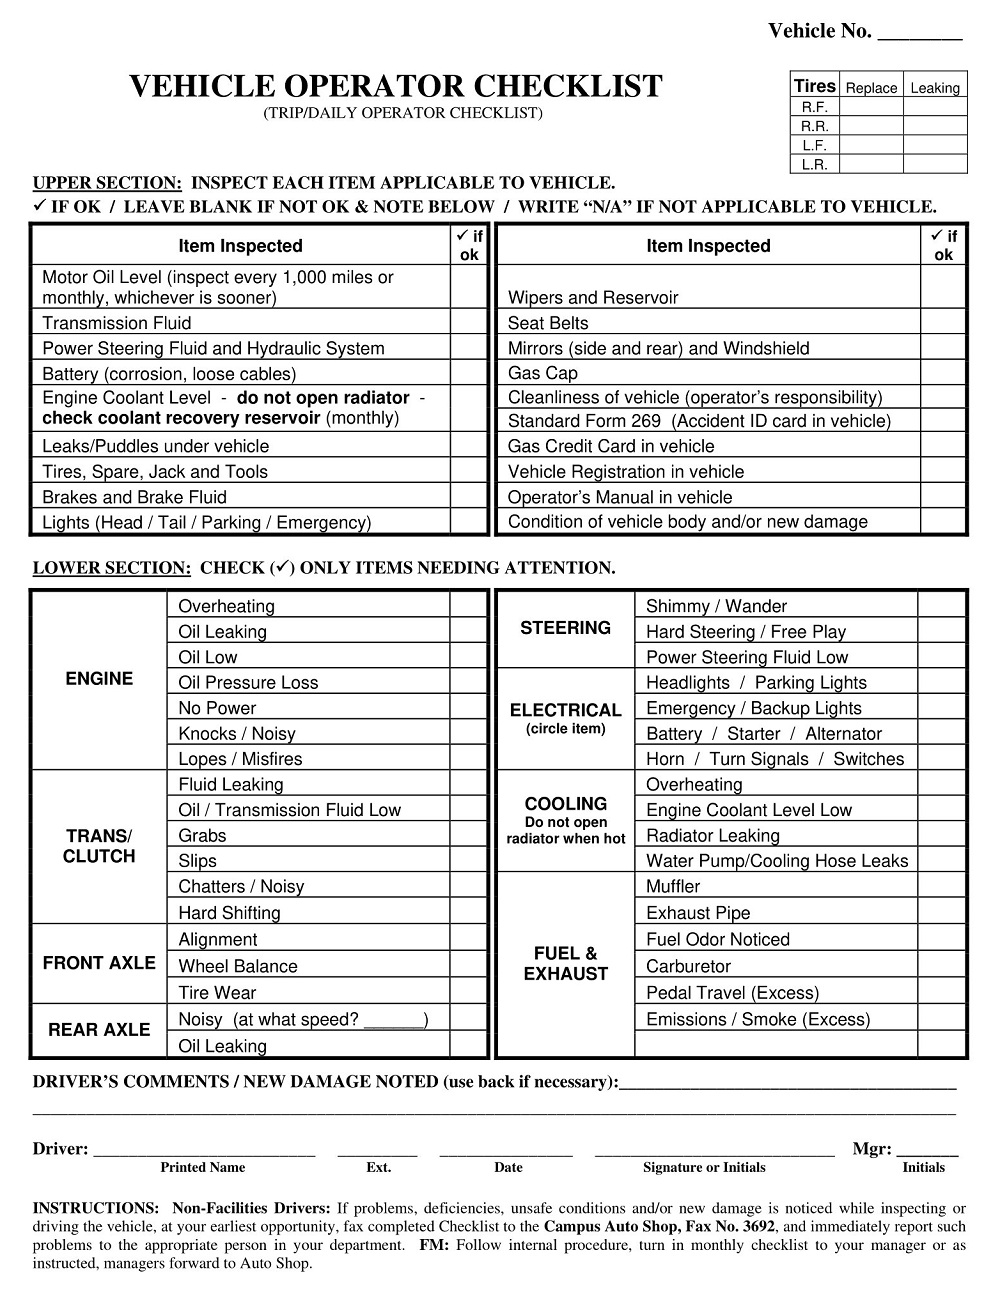 Vehicle Operator Cleanliness Inspection Checklist